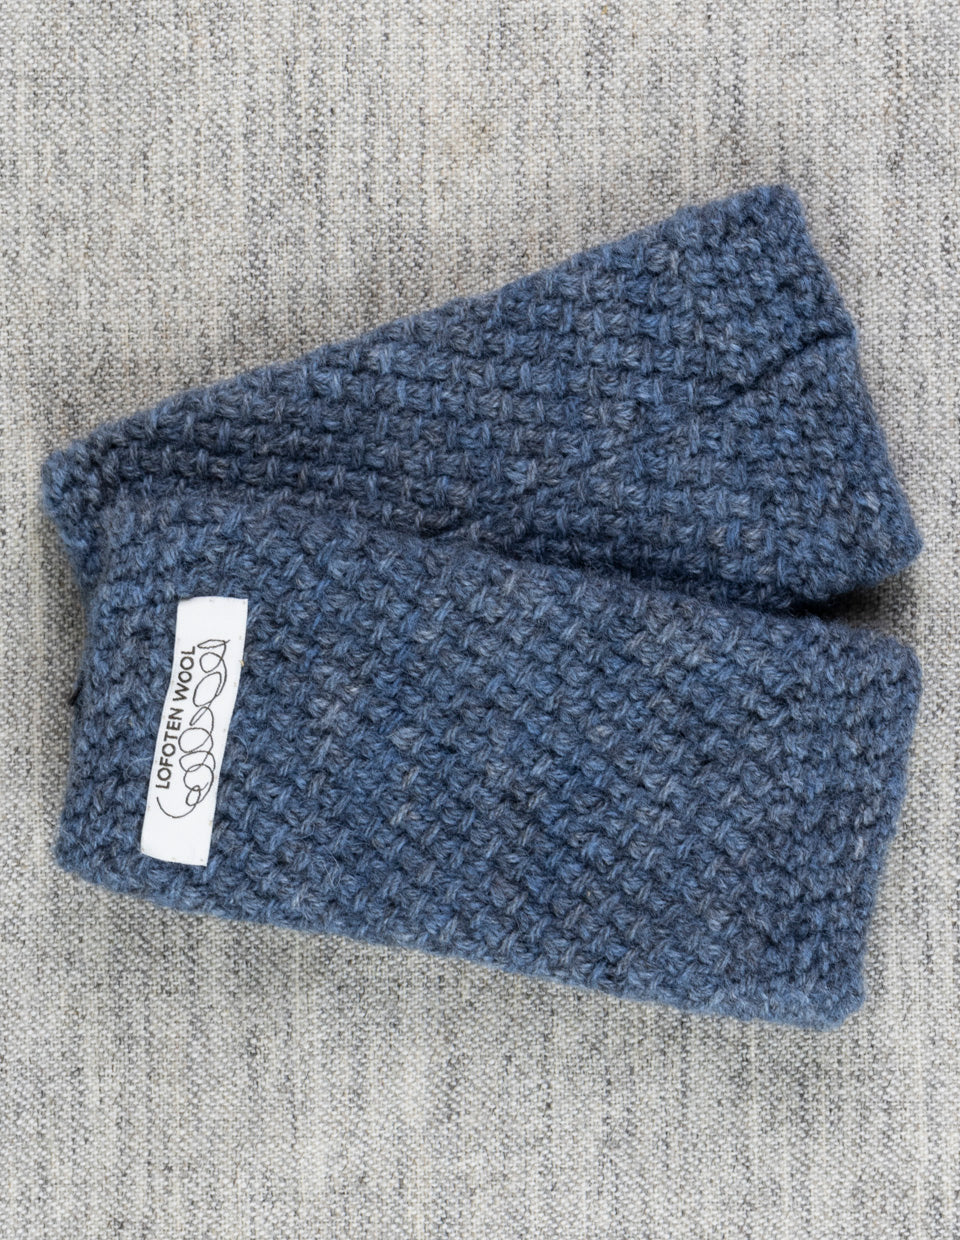 Wrist warmers and head band in Snykvit, knitting kit